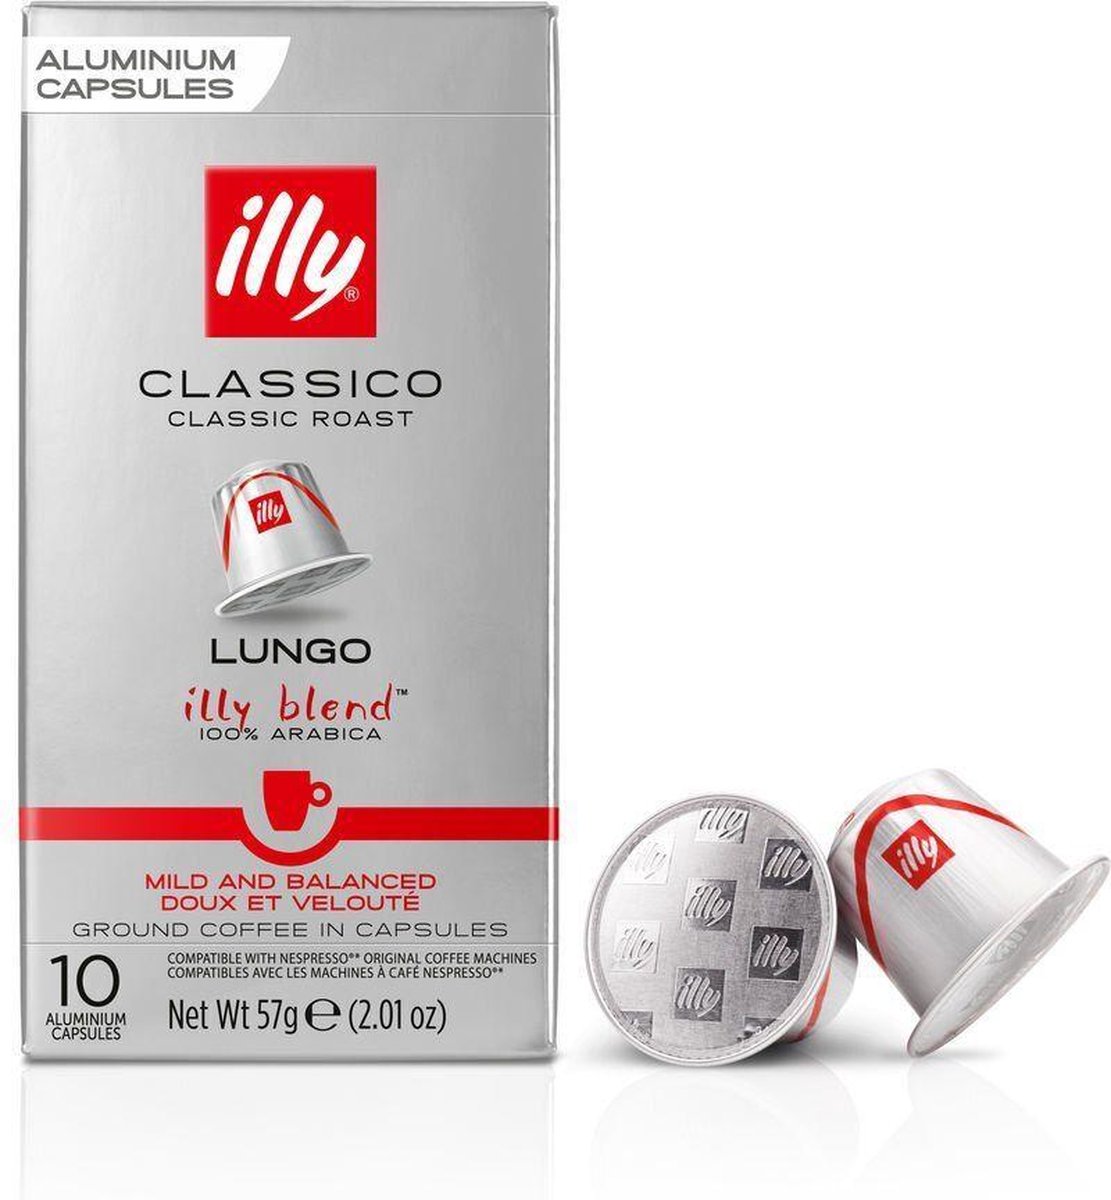 Illy capsules LUNGO classico roast (10st) - illy